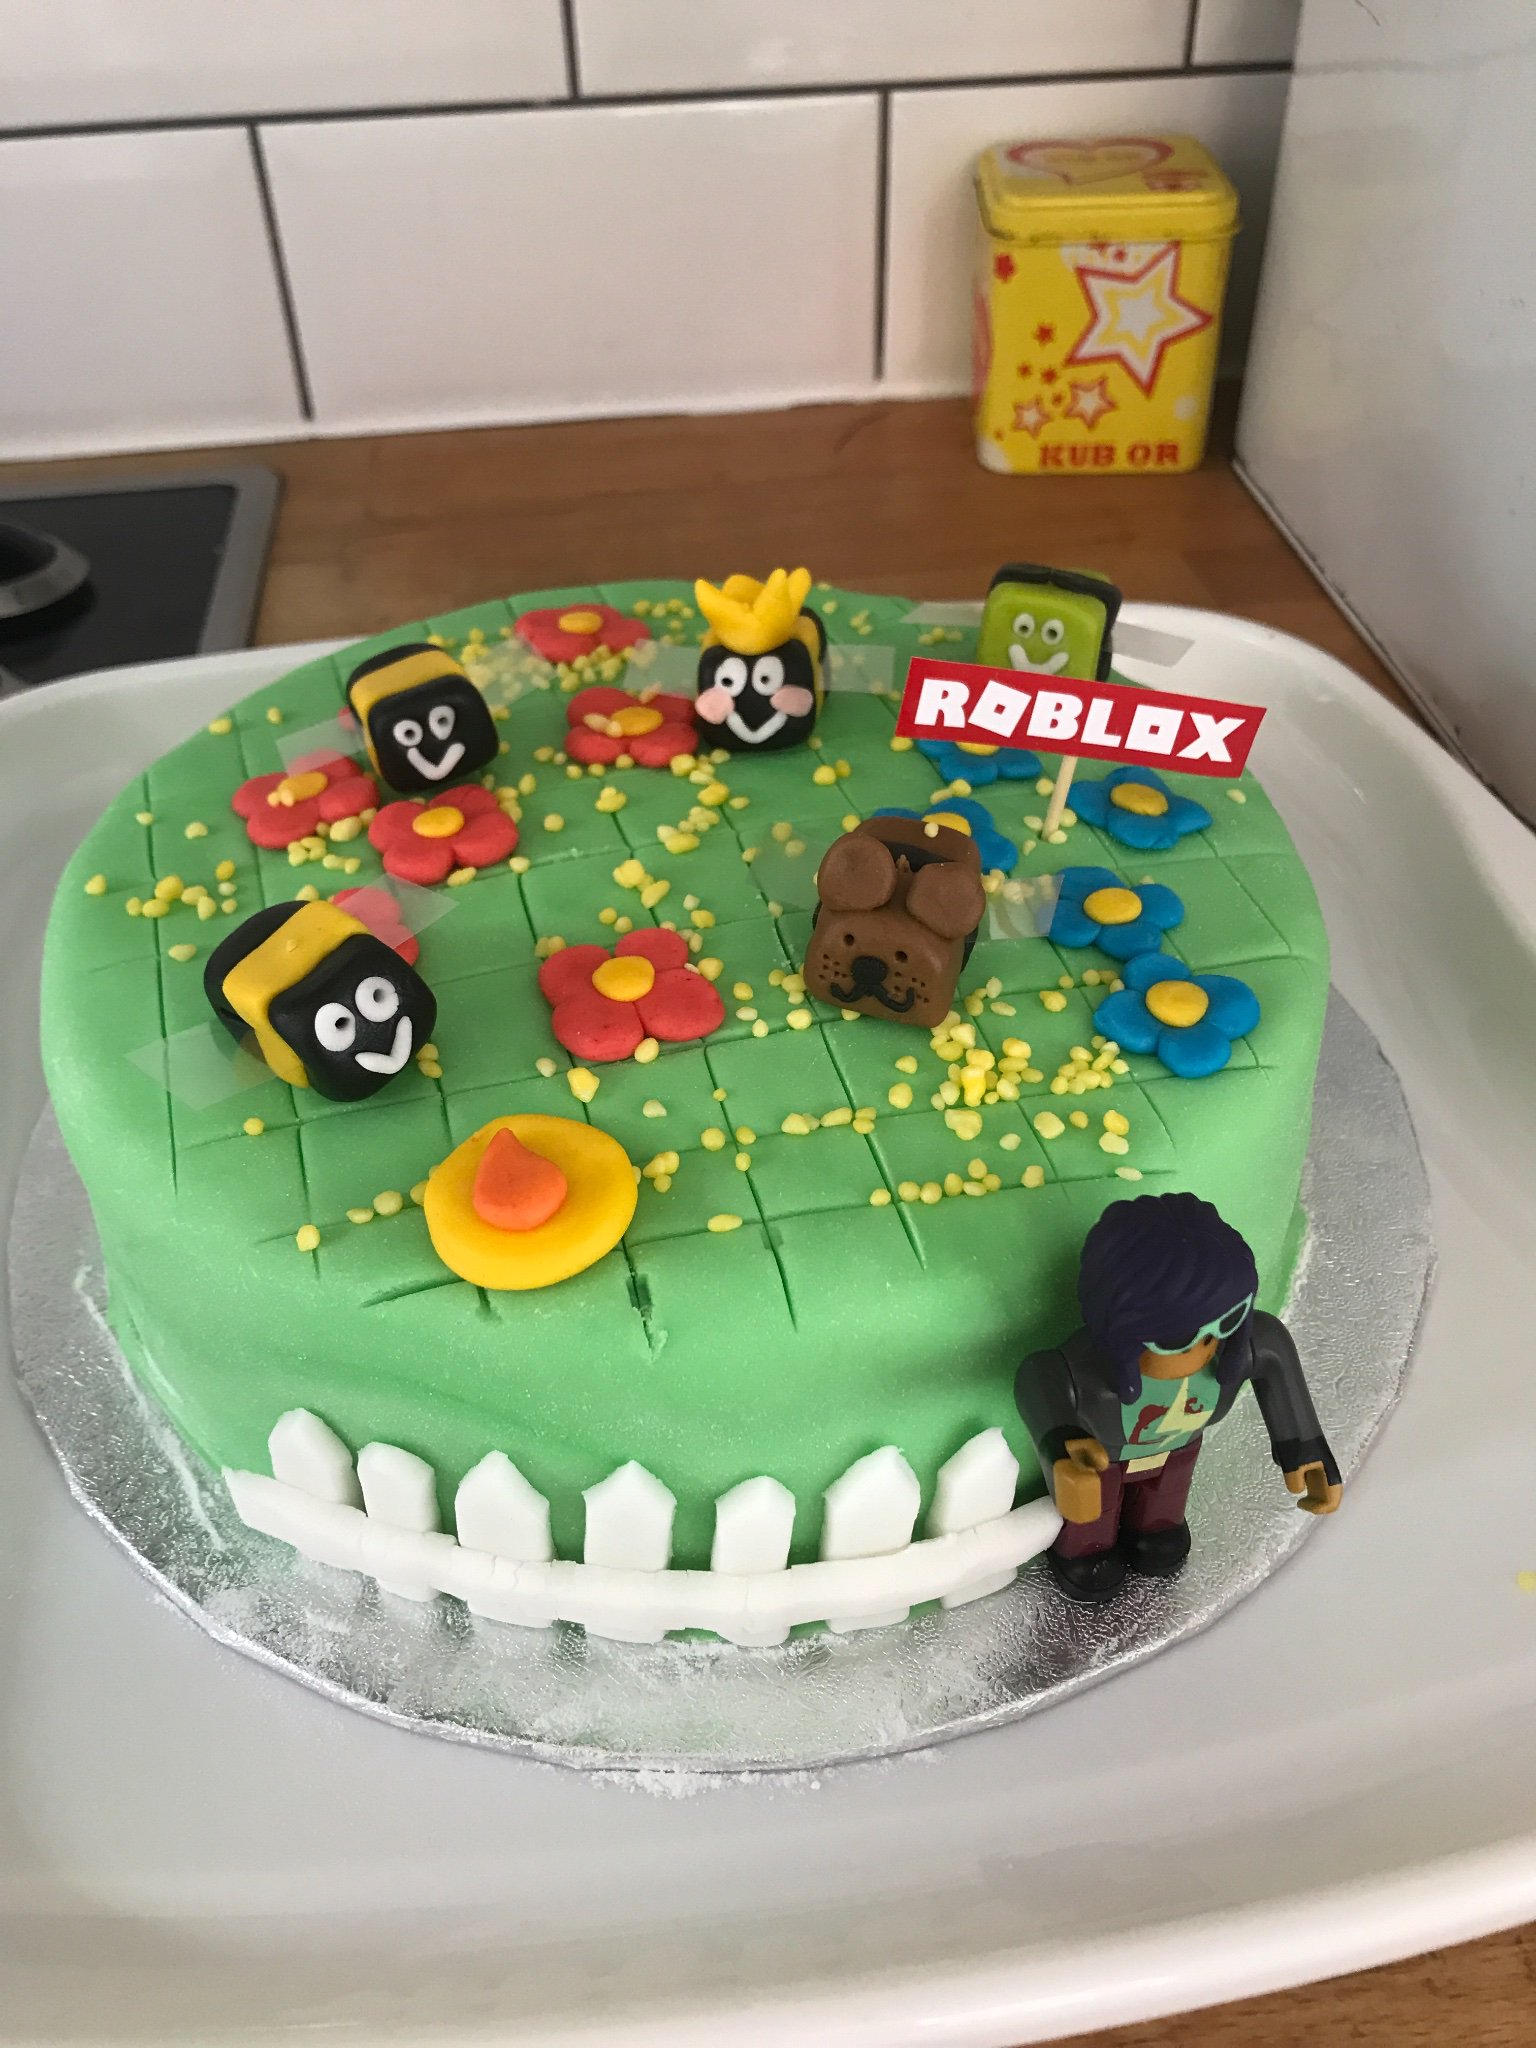 Laura Price On Twitter Finished Cake Alert It S Beeswarmsimulator From Roblox Btw Noobs Hope The Kiddo Is Suitably Impressed Turning10 Wheredidthatdecadego Https T Co 6gsmohasqf - roblox noob cake